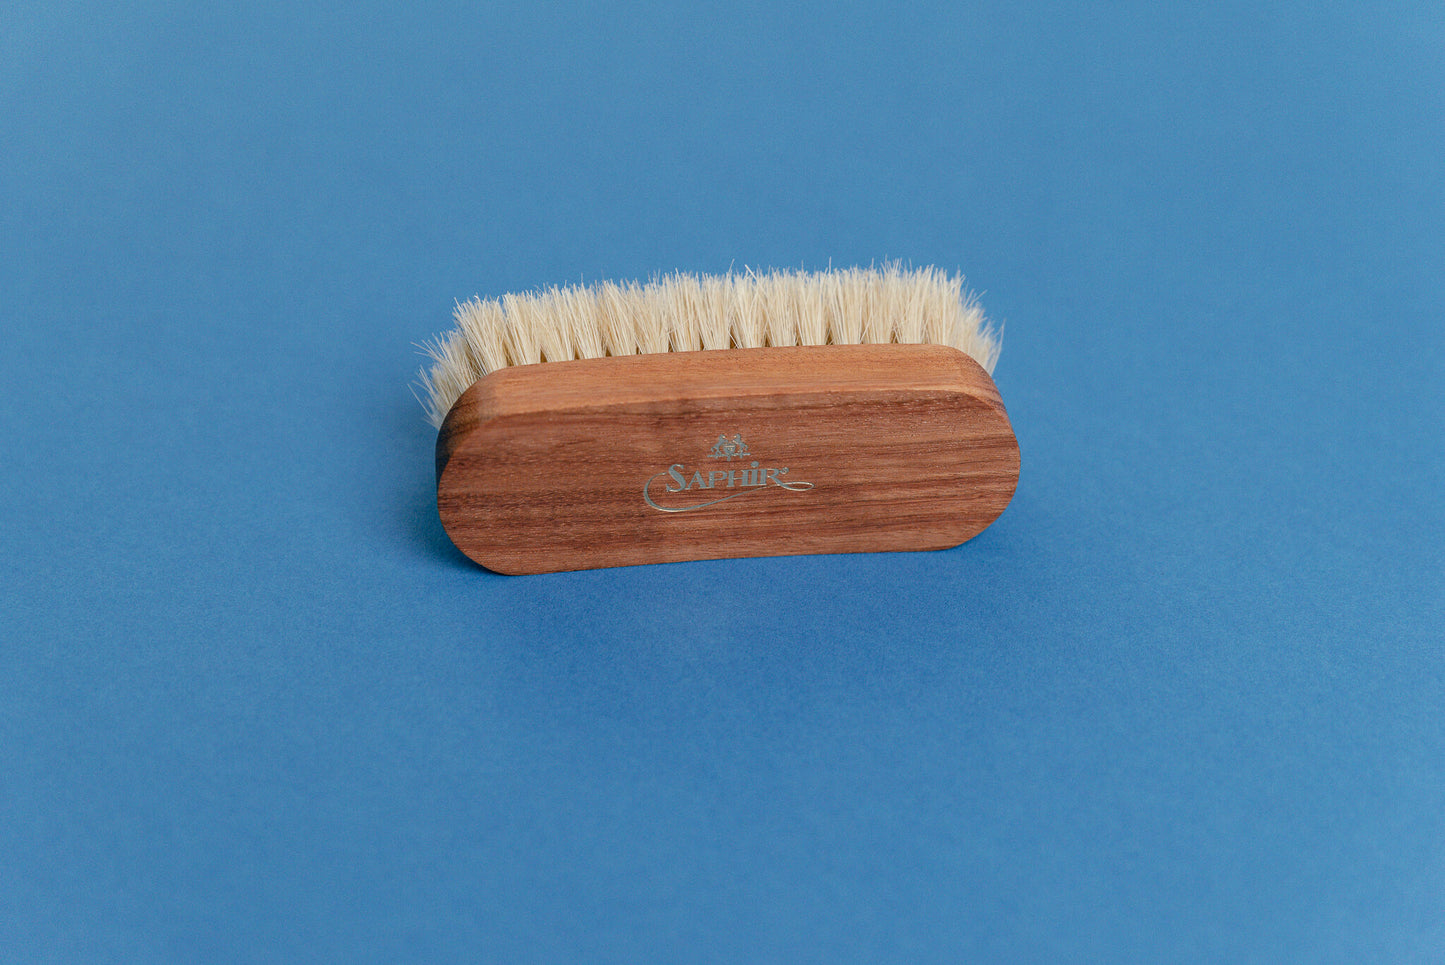 Saphir Medaille d'Or Mini Horse Hair Brush close up of wooden handle at an angle